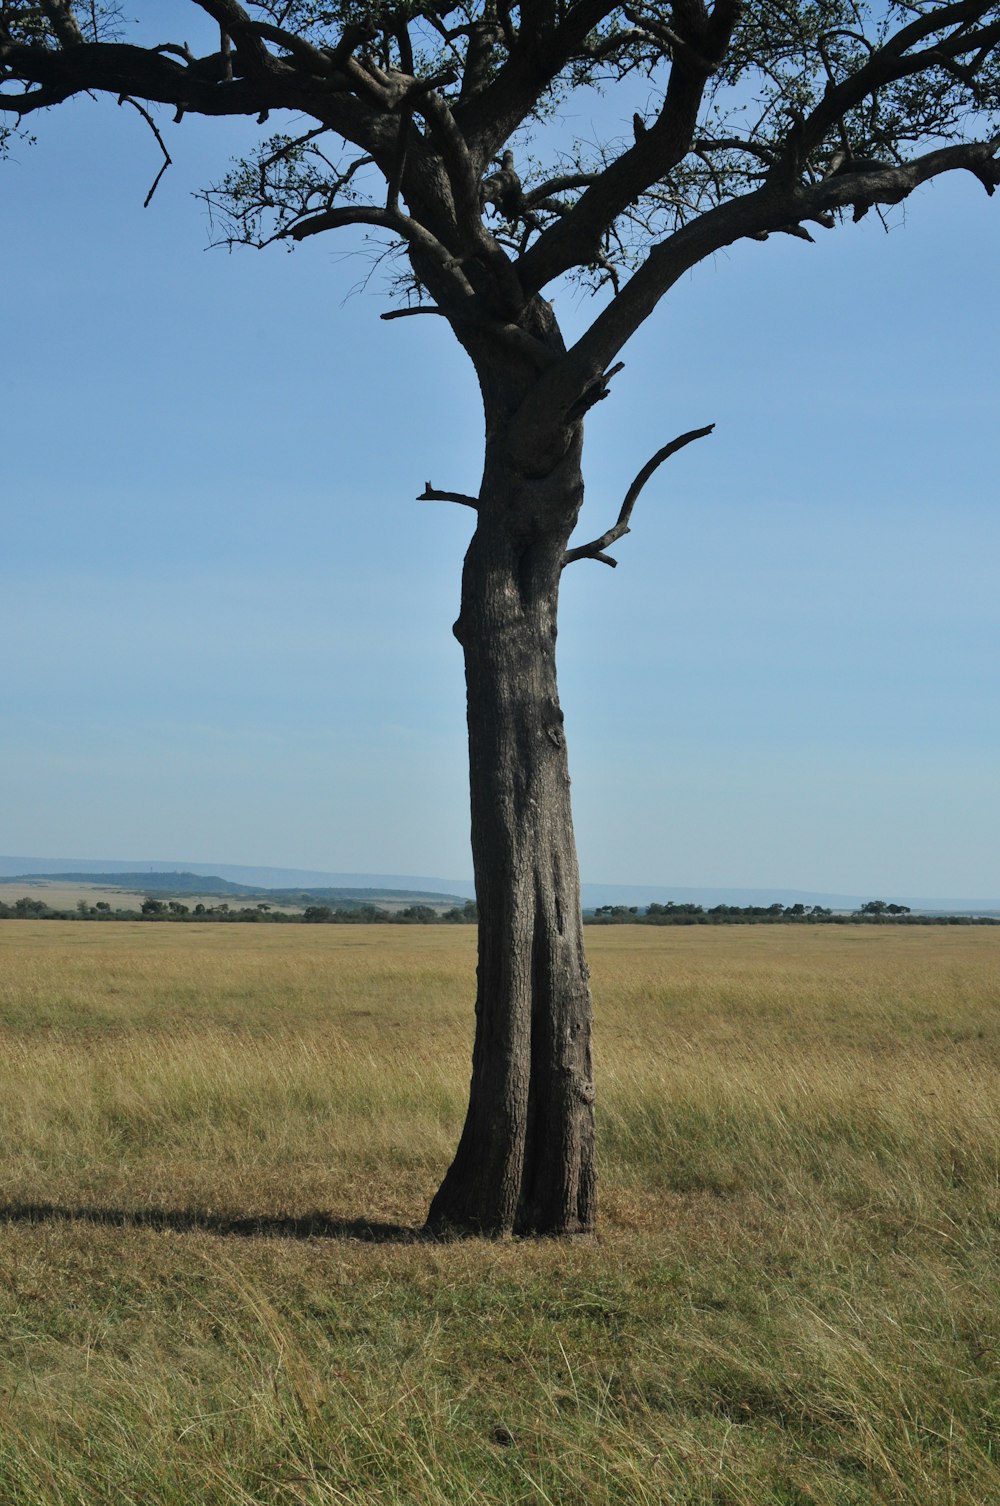 a lone giraffe standing next to a tree in a field